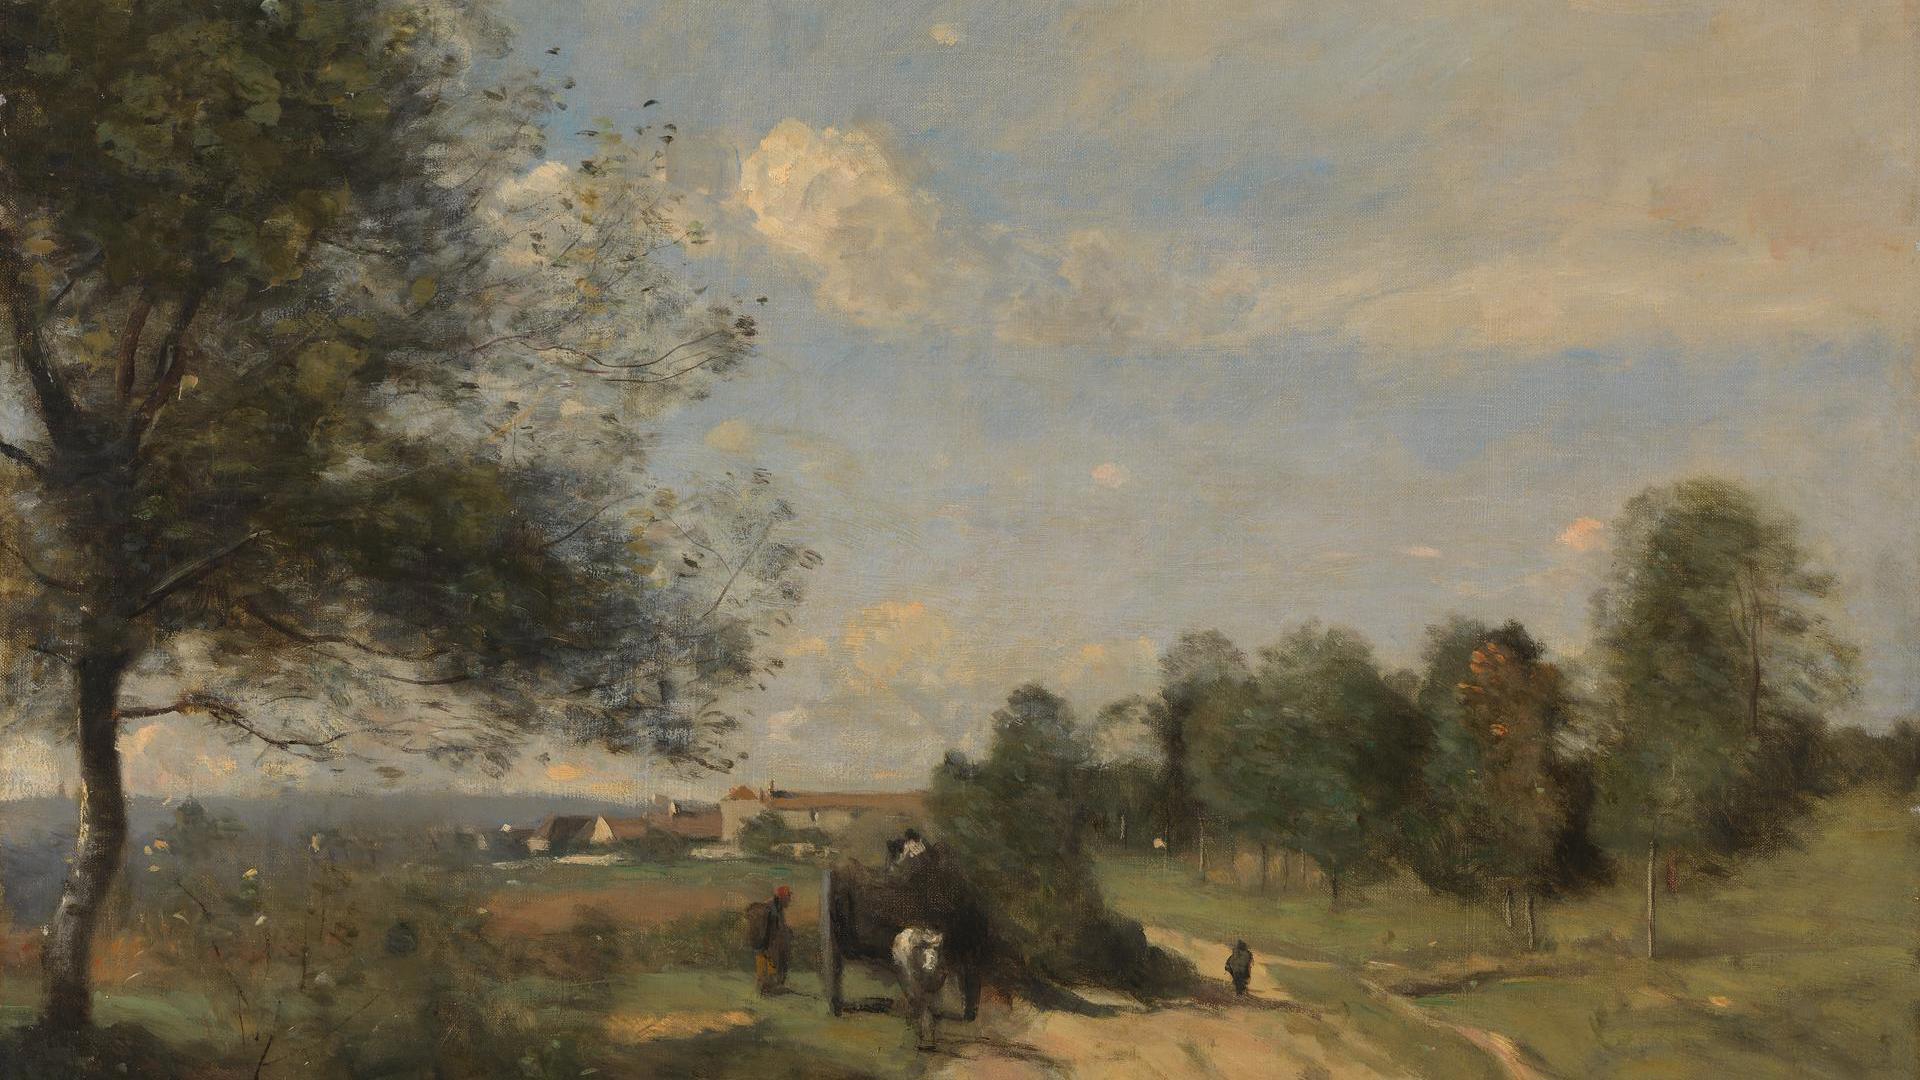 The Wagon ('Souvenir of Saintry') by Jean-Baptiste-Camille Corot